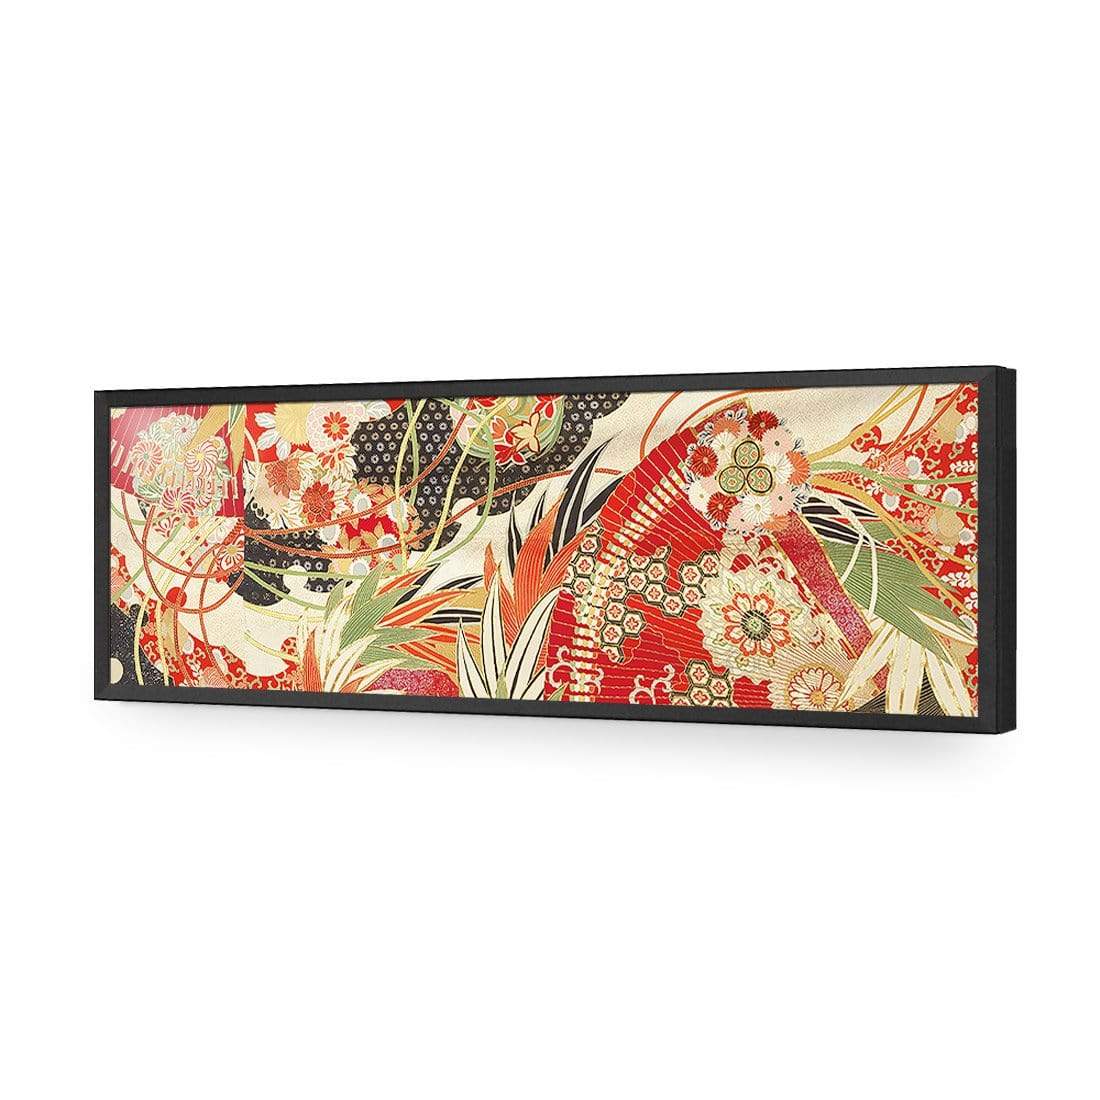 Japanese Fabric Red Flowers and Fans - wallart-australia - Acrylic Glass No Border